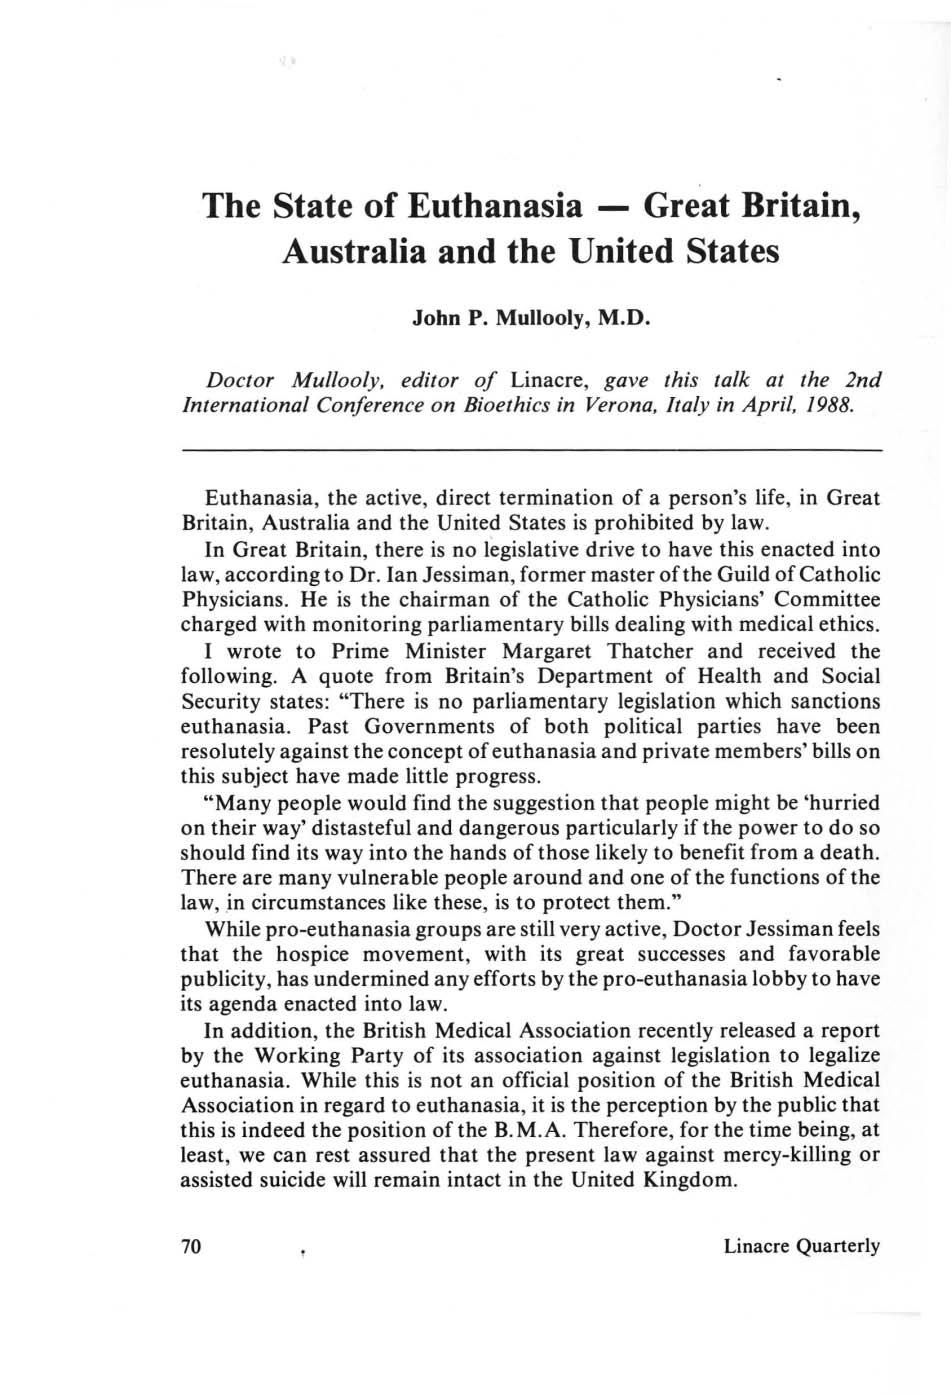 The State of Euthanasia - Great Britain, Australia and the United States John P. Mullooly, M.D.